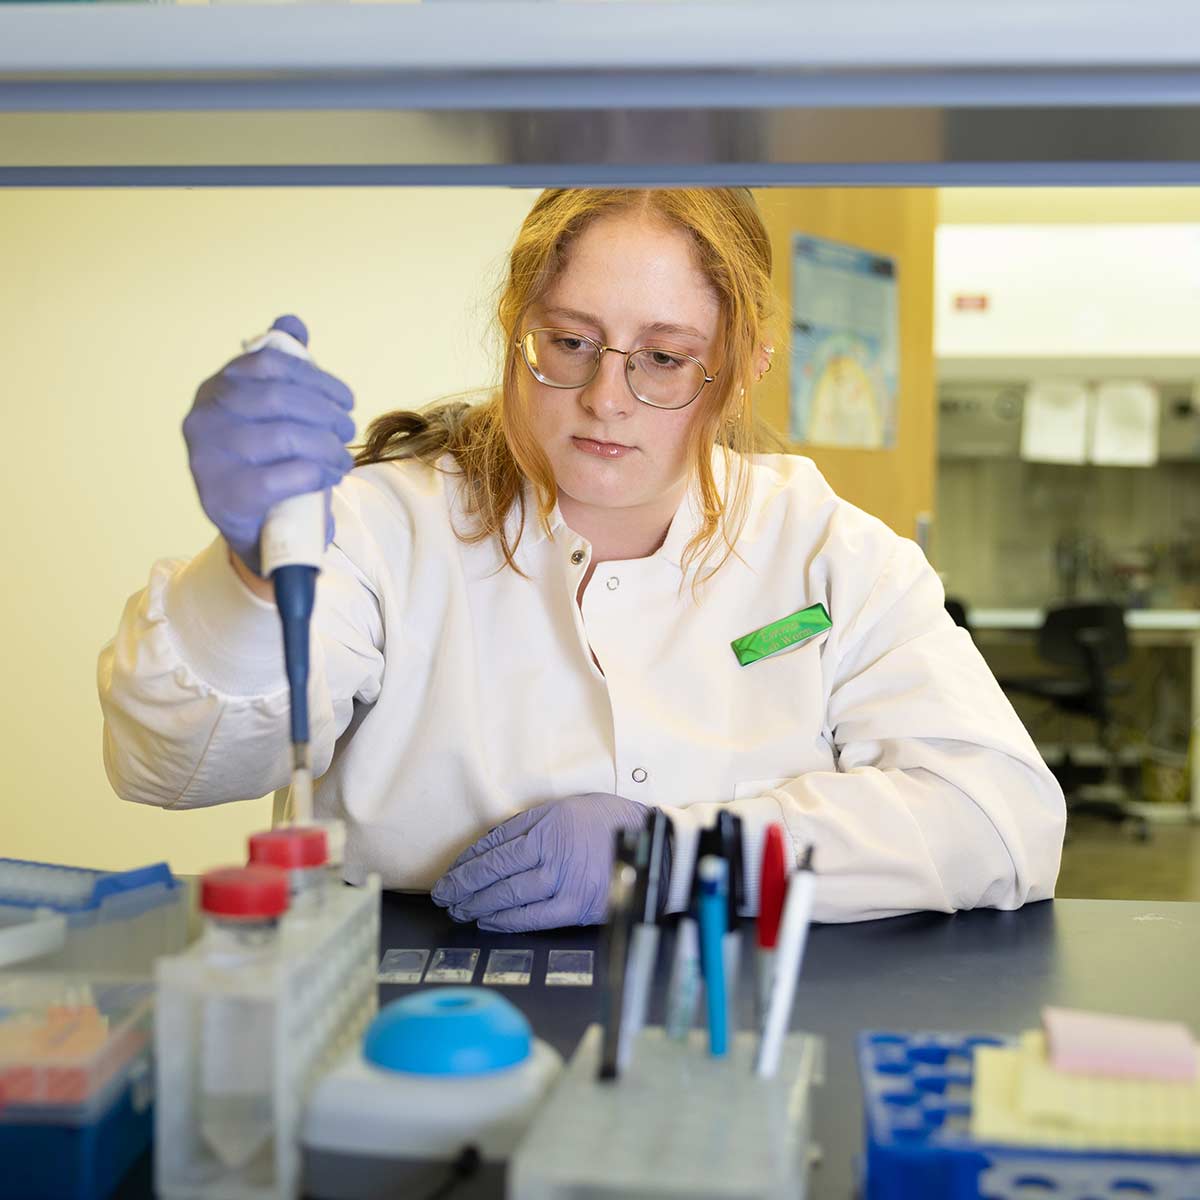 A biology student in a white lab coat conducts research work inside Jordan Valley Innovation Center